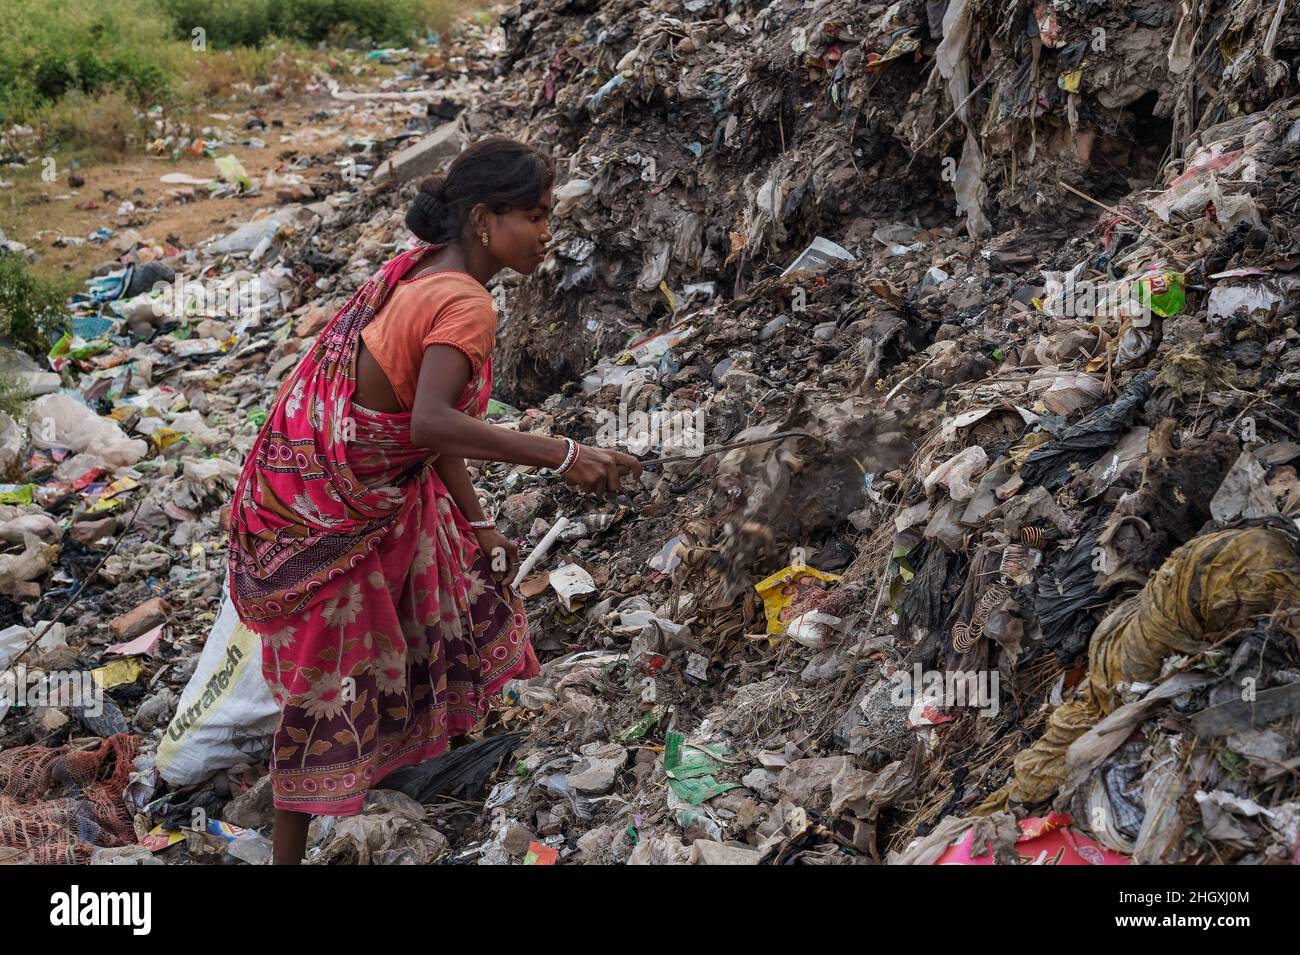 Dalit (untouchable) workers collect and sort waste in Garbage City, the largest landfill in the city of Kolkata (Calcutta), India Stock Photo